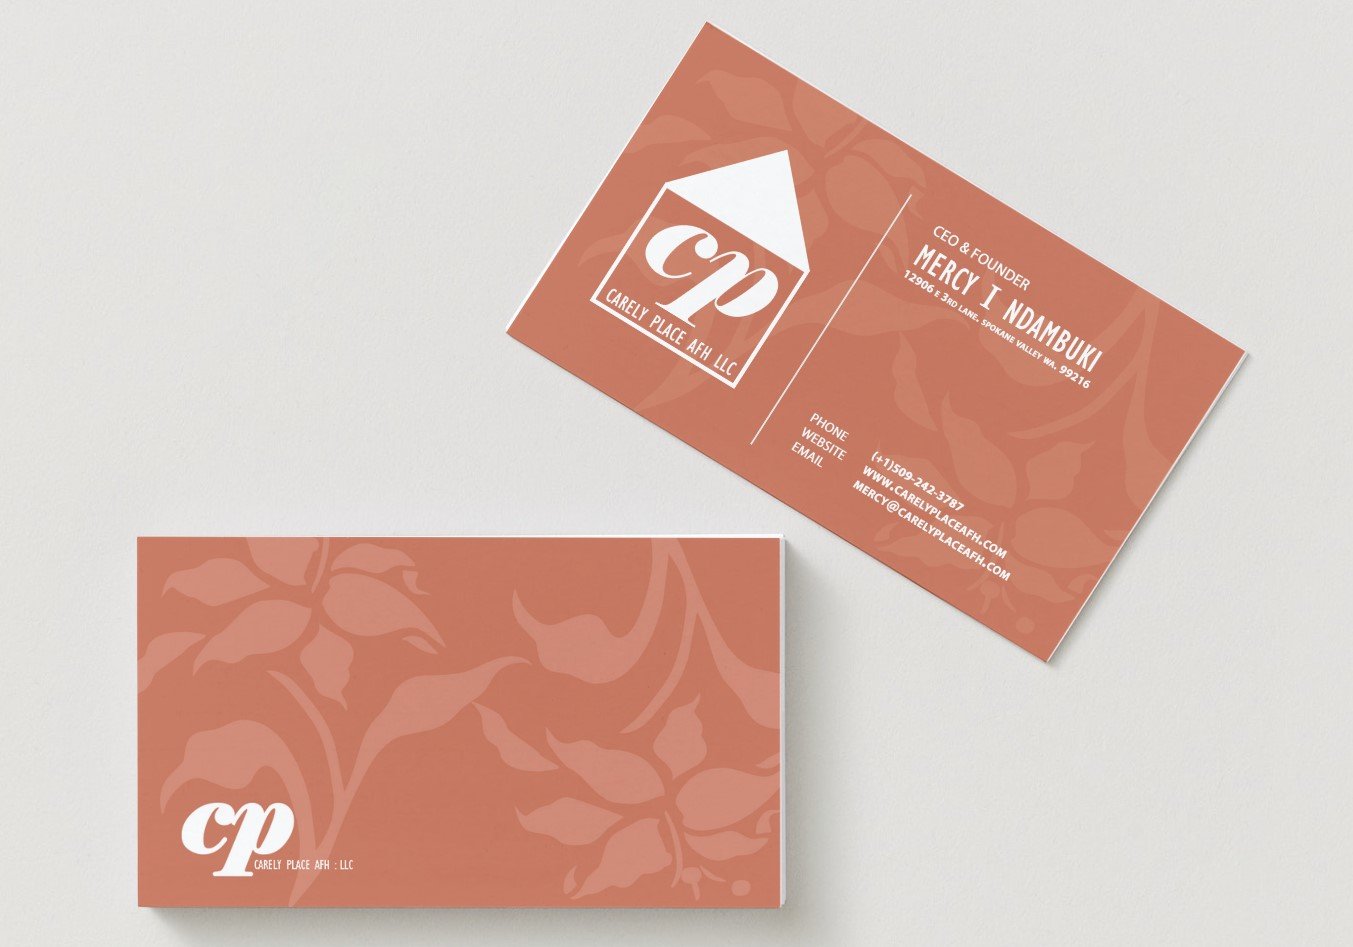 21051401 - Carely Place AFH - Business Cards  - Front & Back.jpg